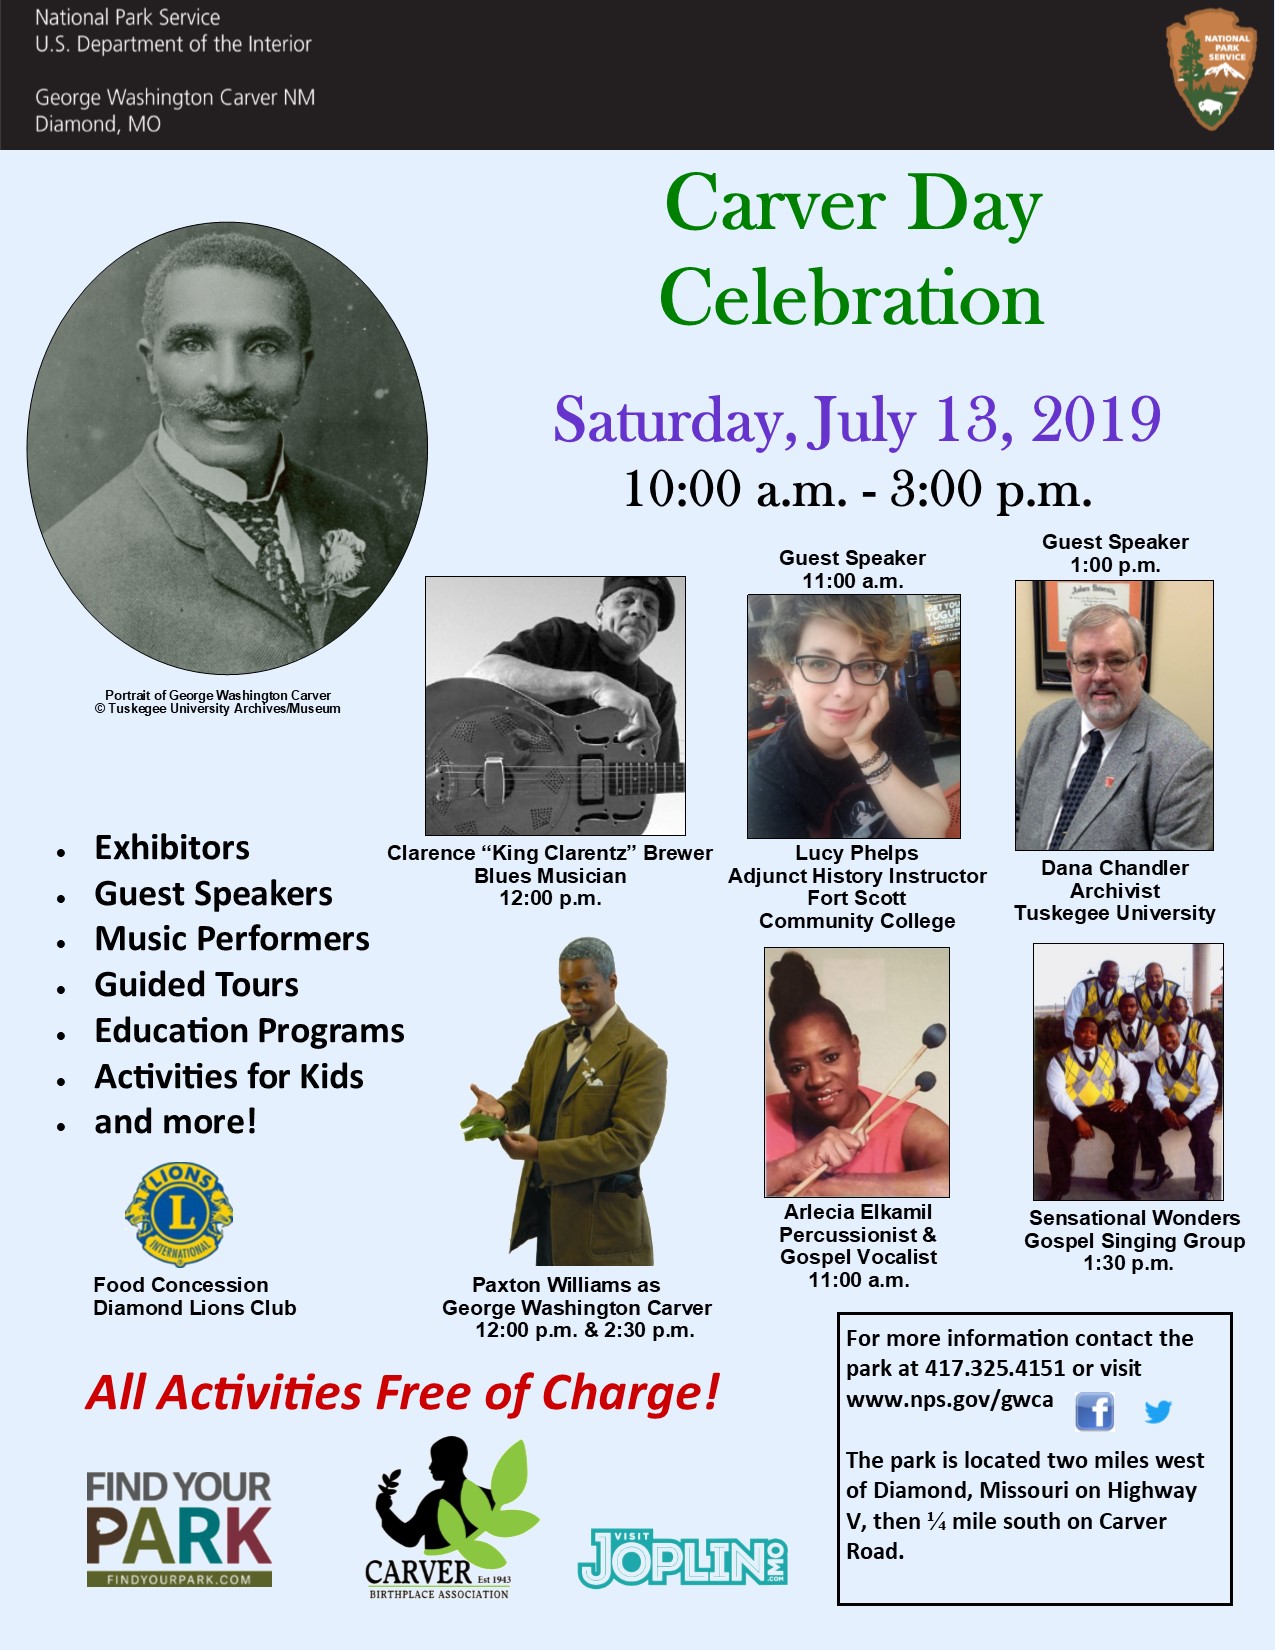 Photograph is for Carver Day special event at the park. The poster includes additional images of guests and information about the event.